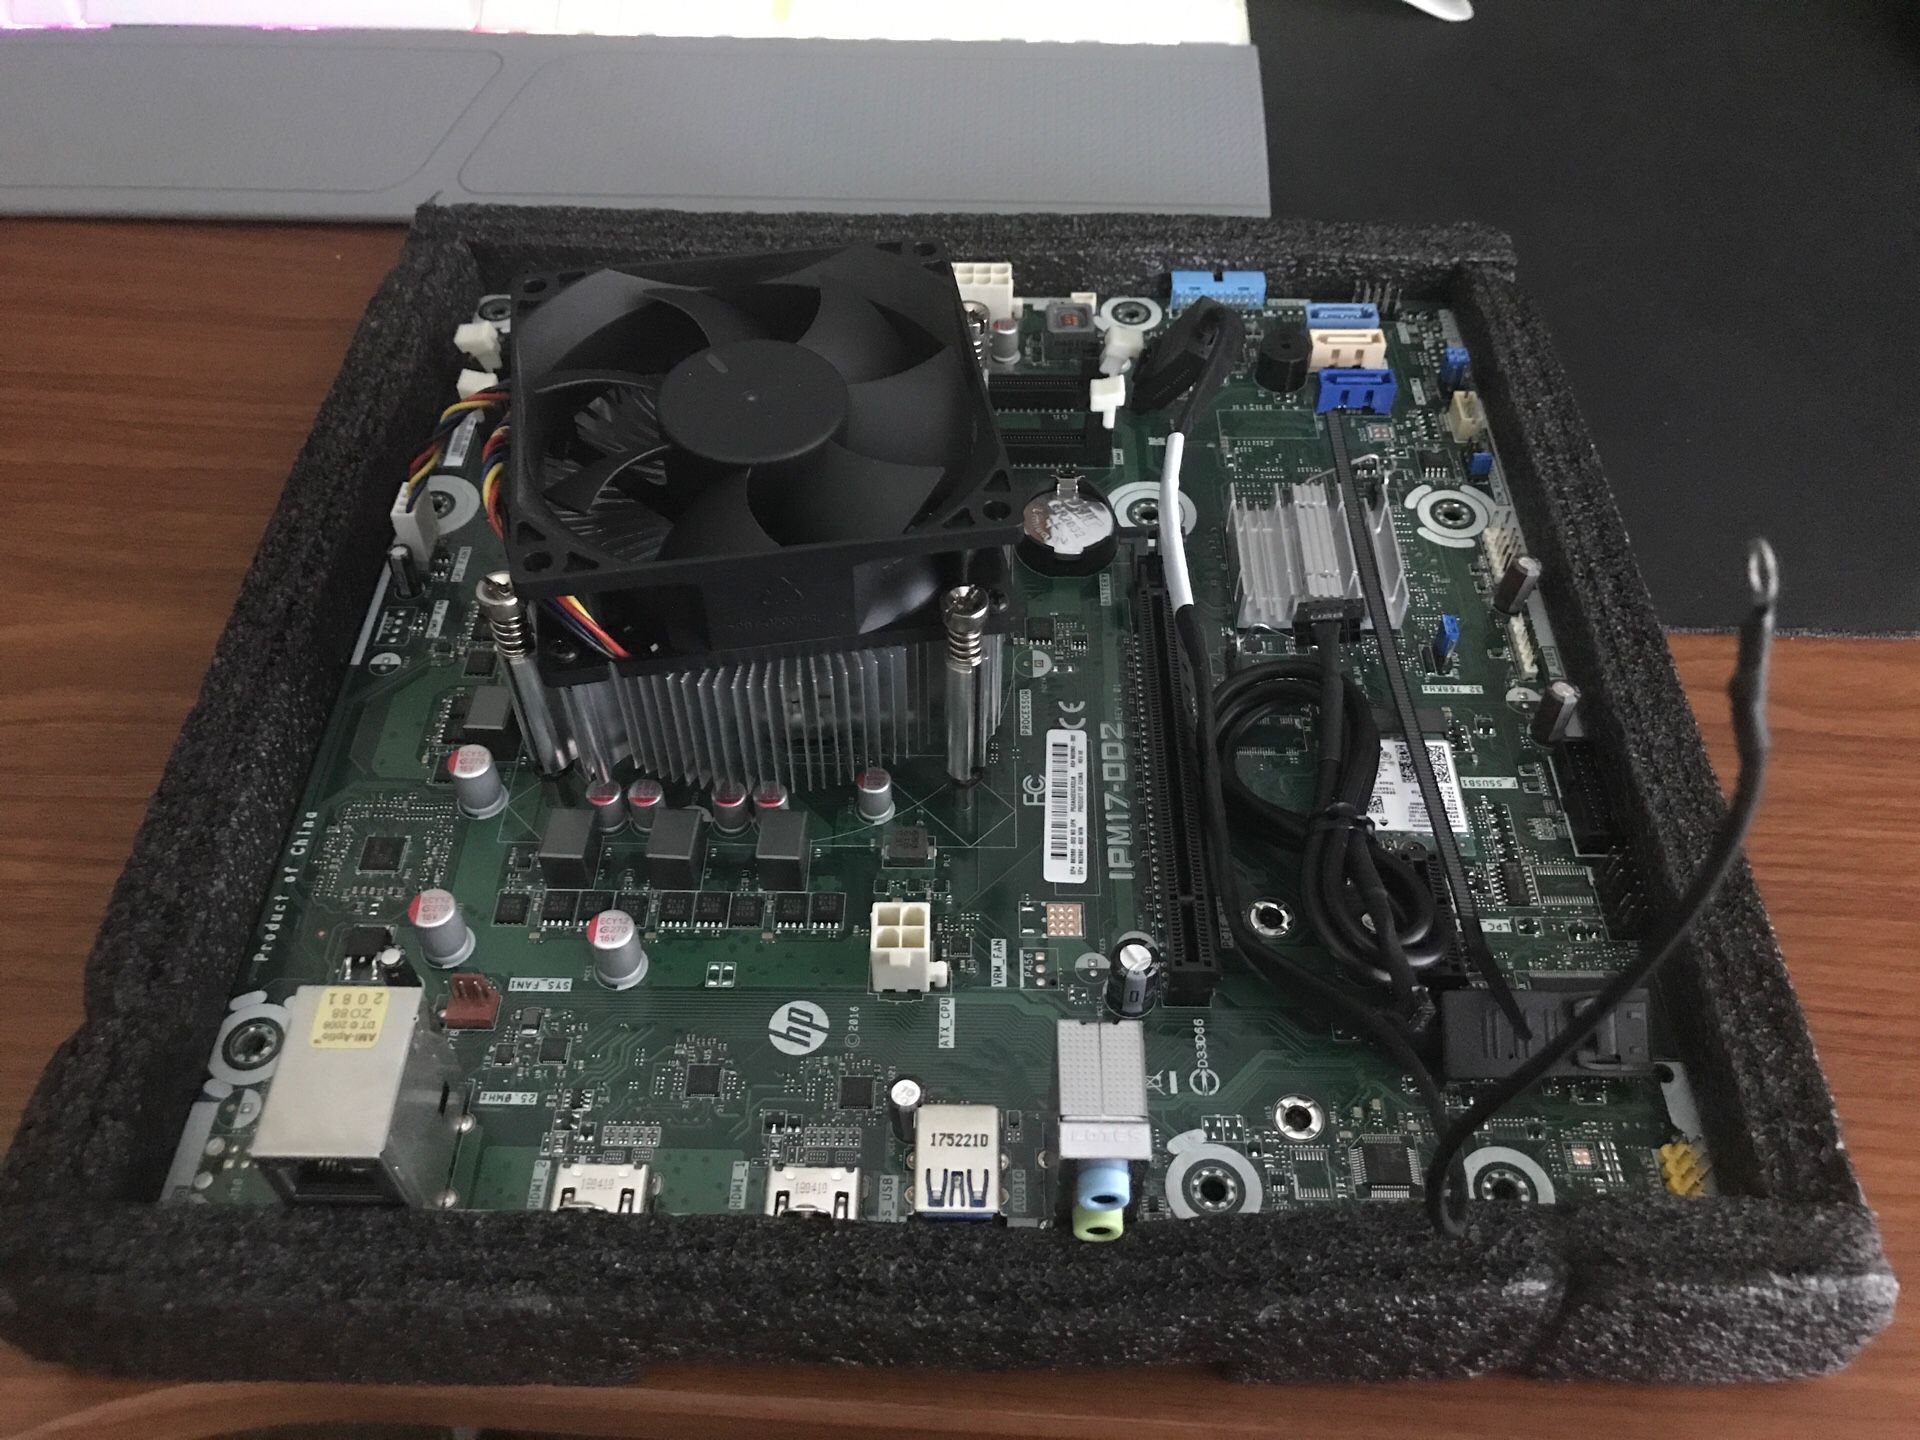 An Odense2-k motherboard paired with a i5-7400